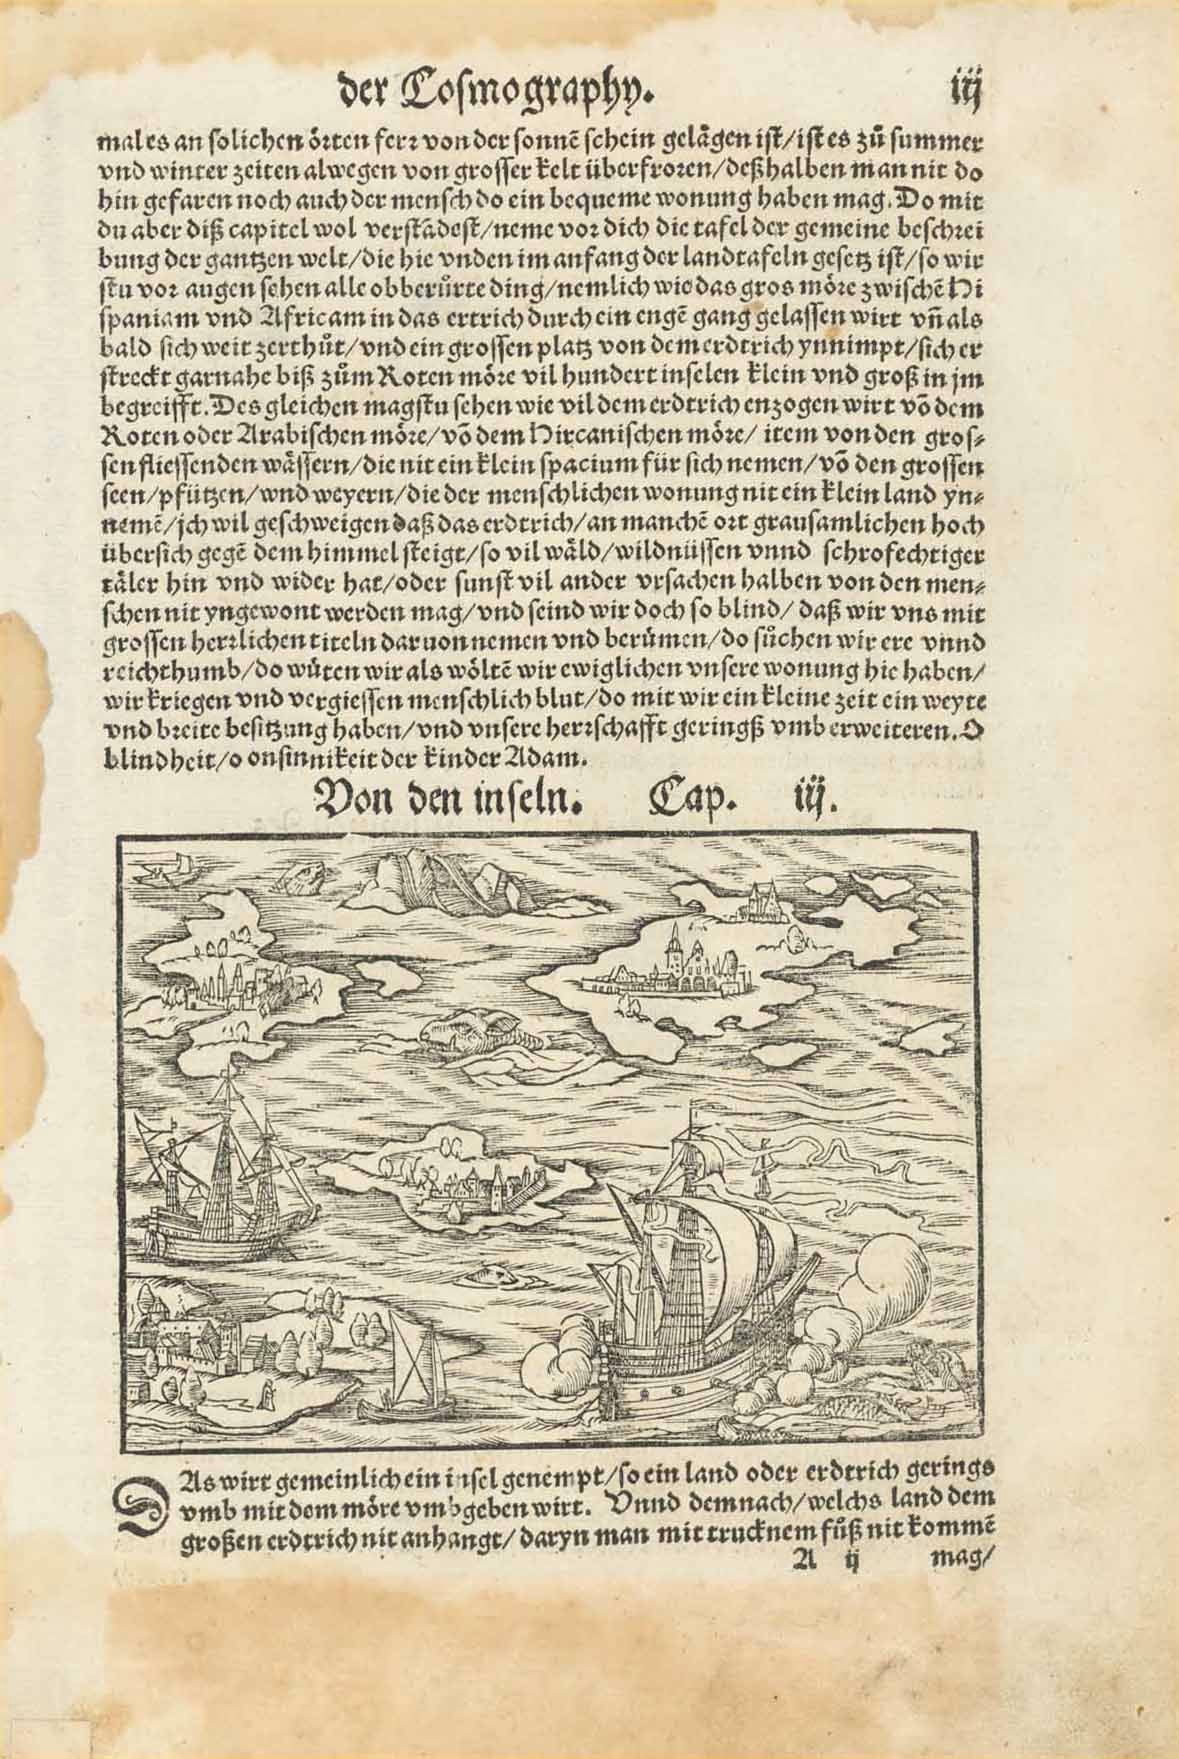 "Von den Inseln" (About islands)  Woodcut.  Published in "Cosmographia" by Sebastian Muenster (1488-1552)  Basel, 1553  Muenster describes this fictitious map showing inhabited islands and 16th century sail ships as "places you cannot reach with dry feet". Probably inspired by new discoveries in Central America Muenster - up to date in news - depicts what had been reported by explorers. Naturally he makes sure to make over serves shudder at the sight of some sea monsters.  Full page. There are water stains 